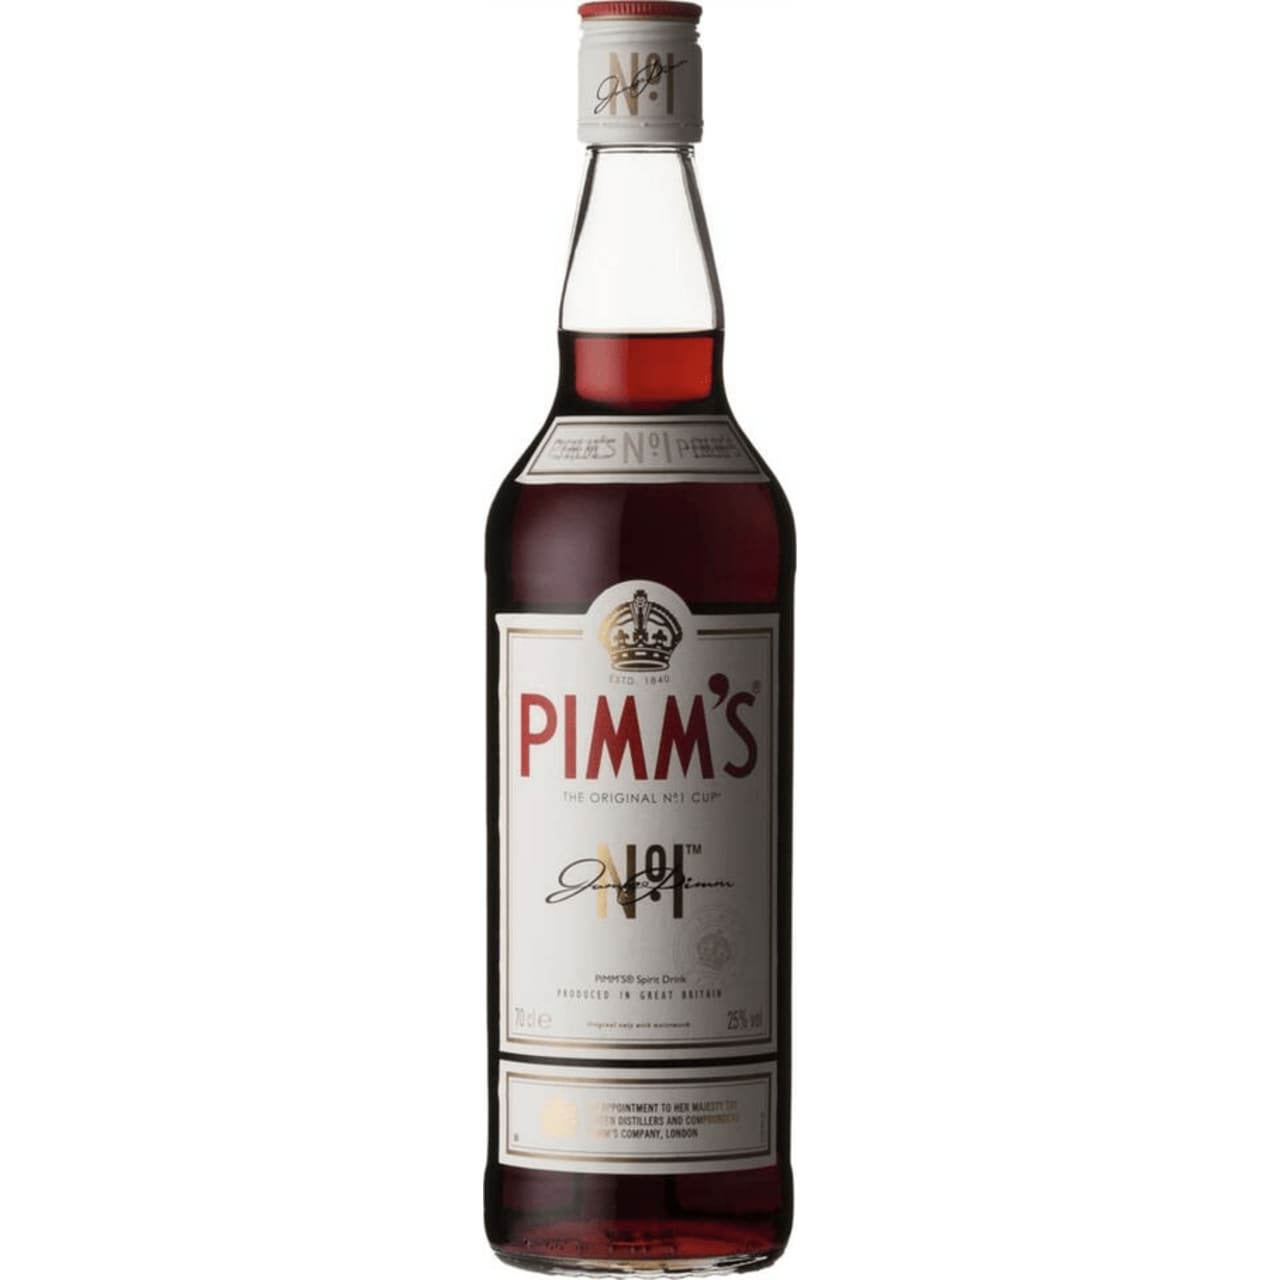 Pimm's served by the jug is very much part of the British Summer. The brand is an icon of the Great British Summer. The original No.1 Cup is made from gin infused with a secret mixture of herbs and liqueurs.